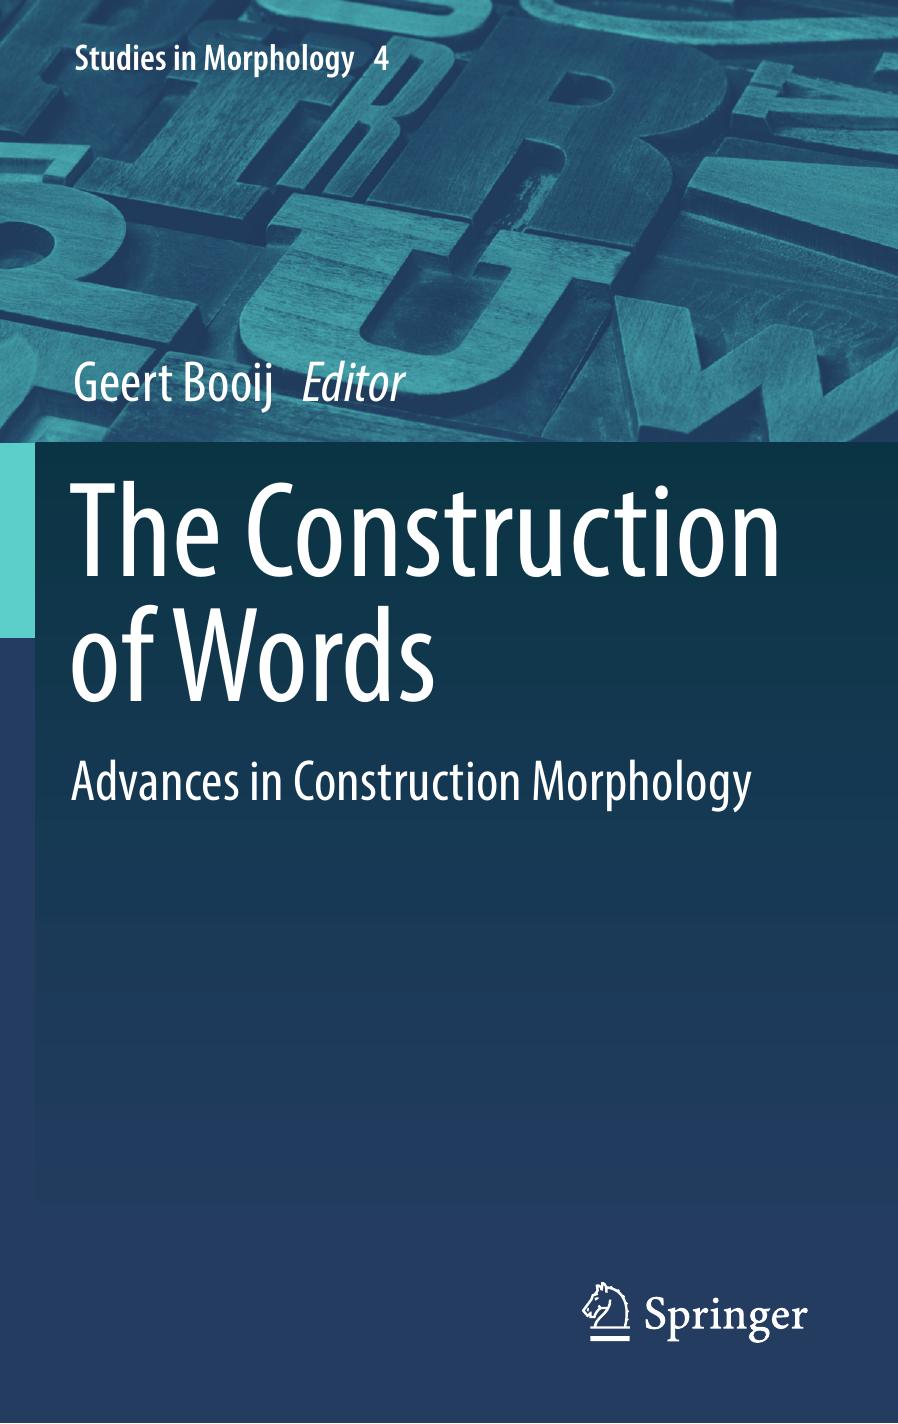 The Construction of Words Advances in Construction Morphology by Geert Booij